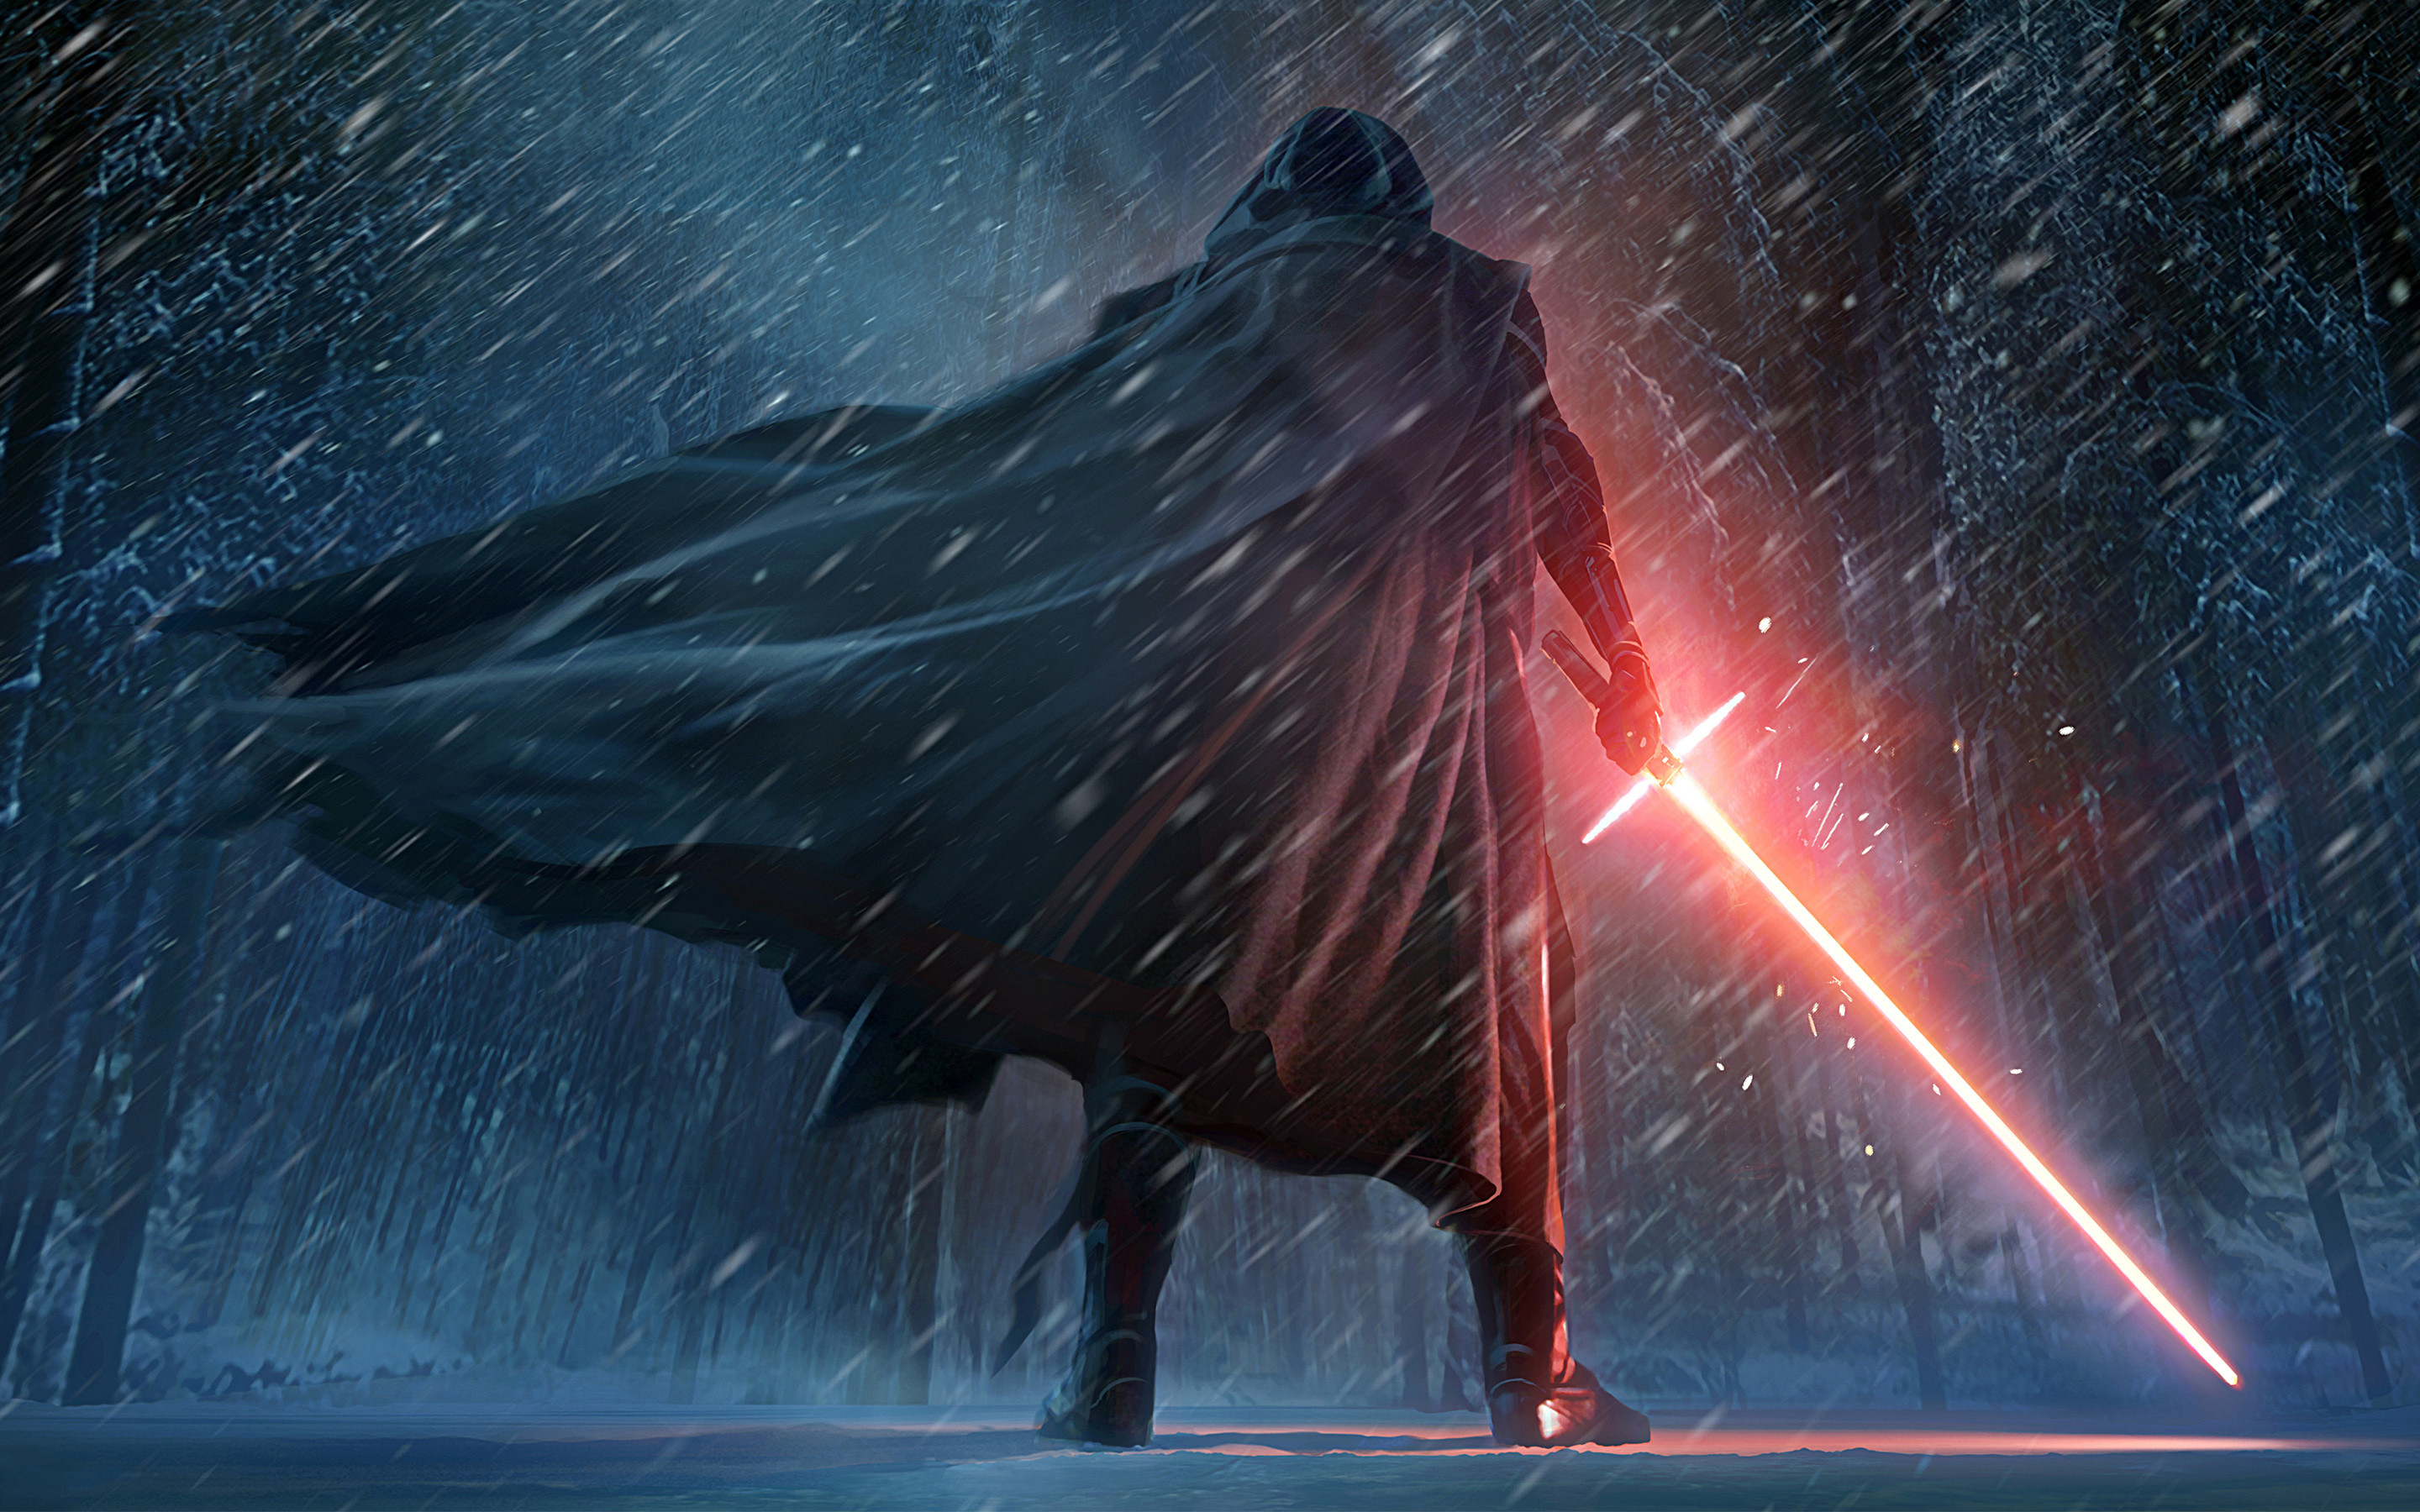 Star Wars The Force Awakens Wallpapers in Best px Resolutions